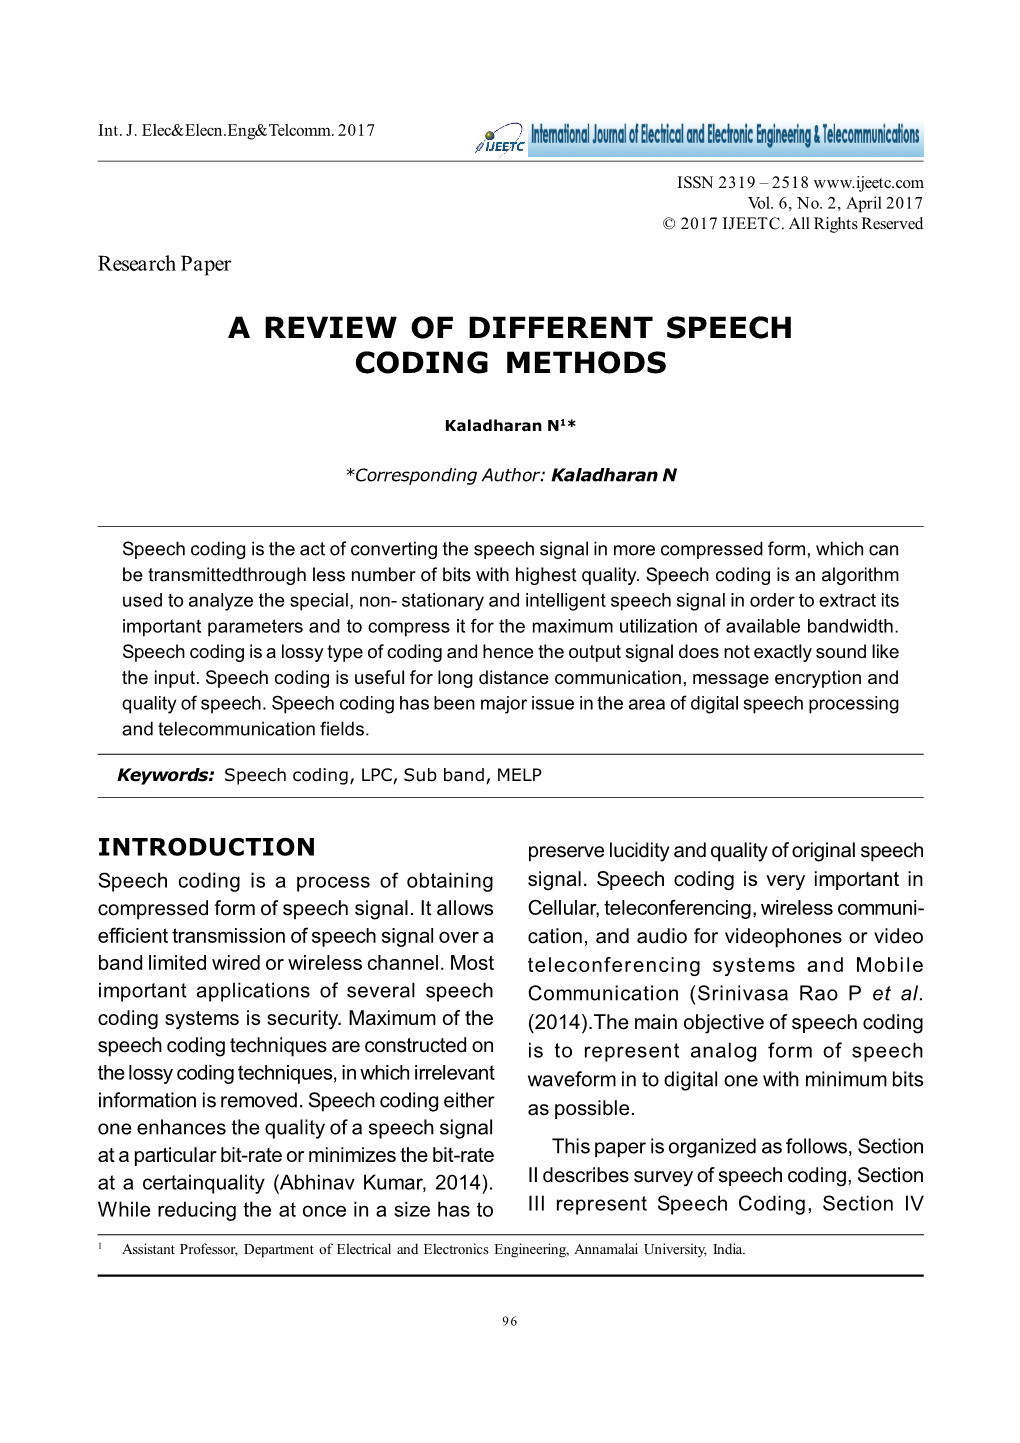 A Review of Different Speech Coding Methods